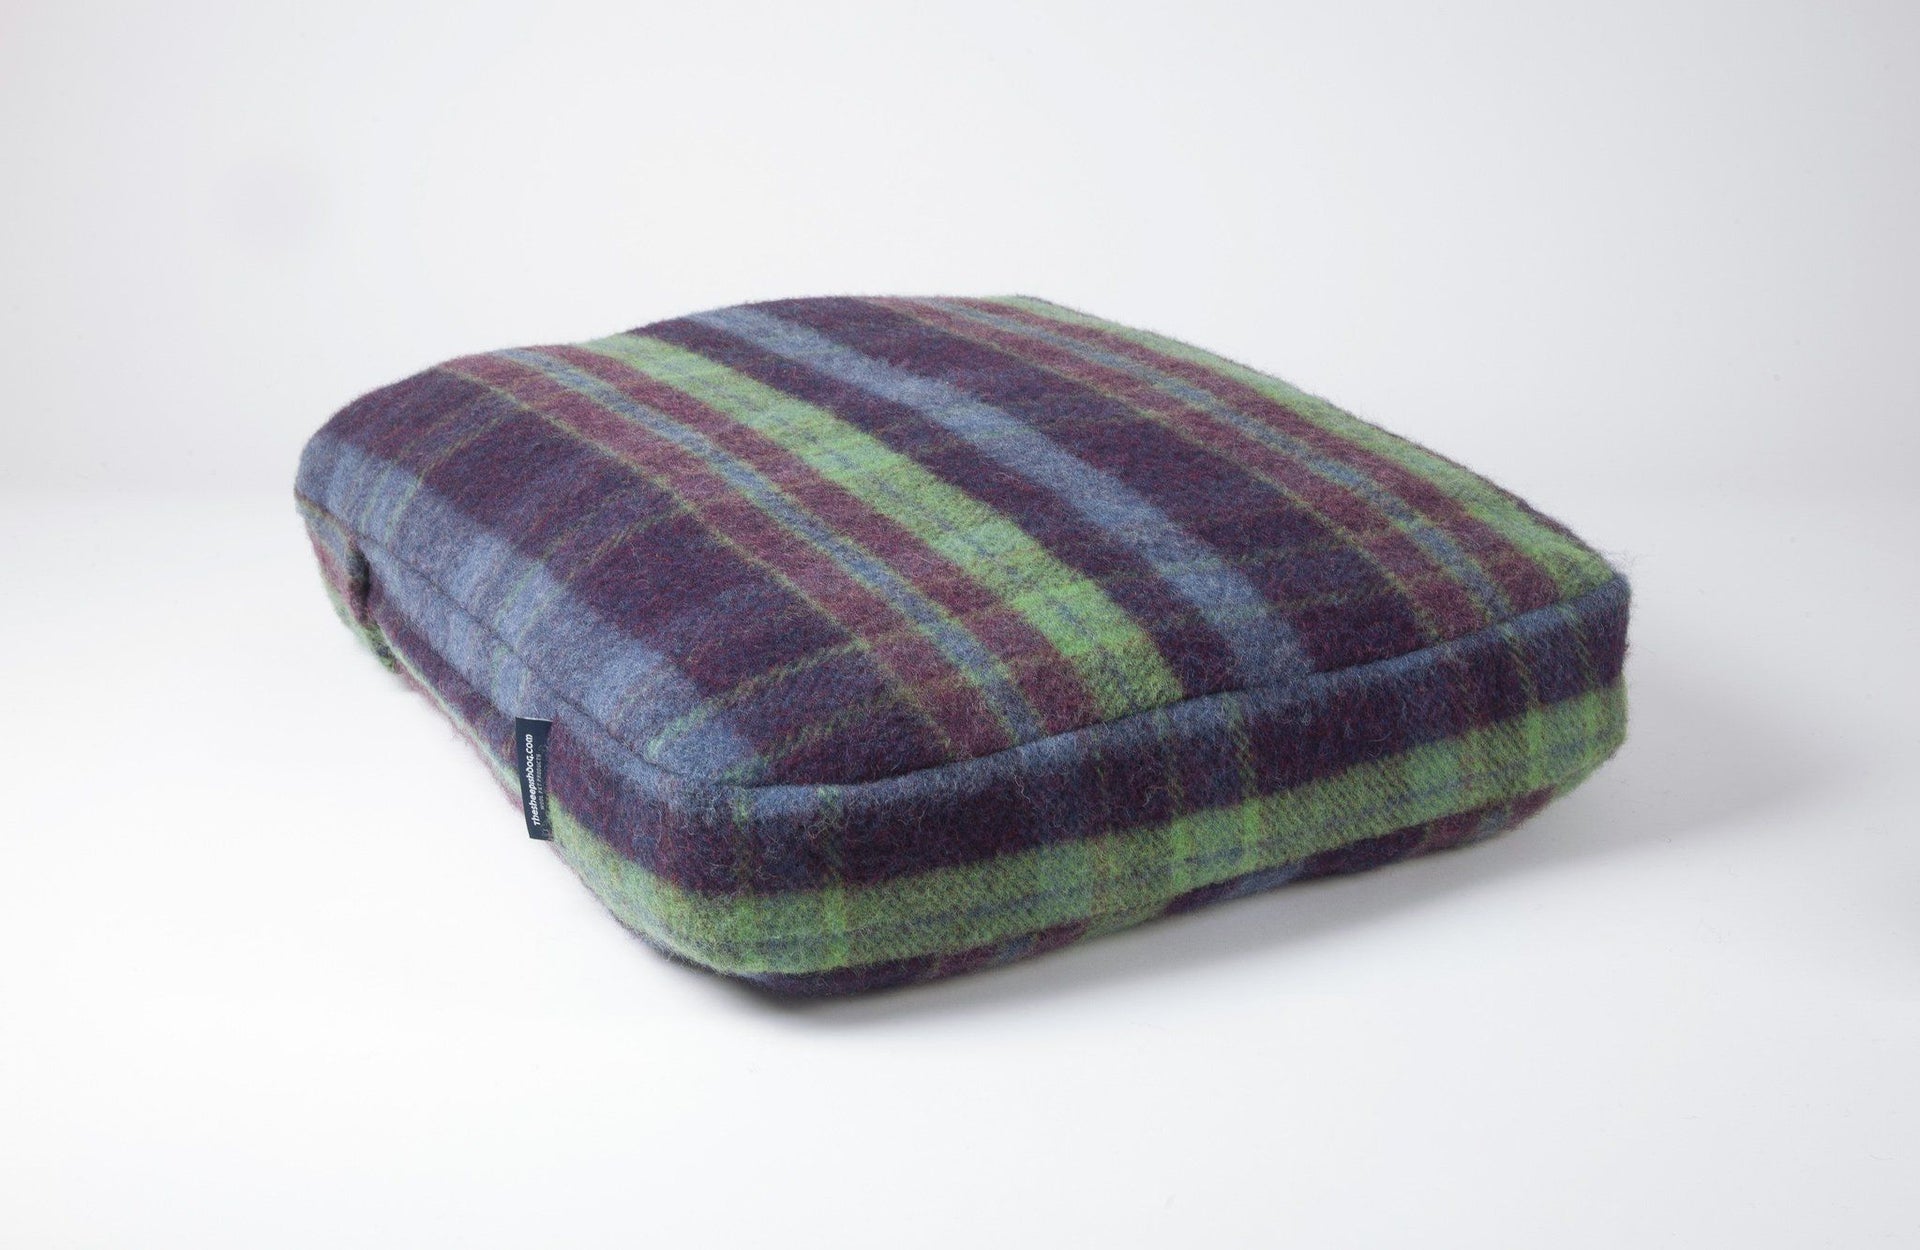 Blanket Wool Atlantic Plaid Dog Bed in Violet and Green